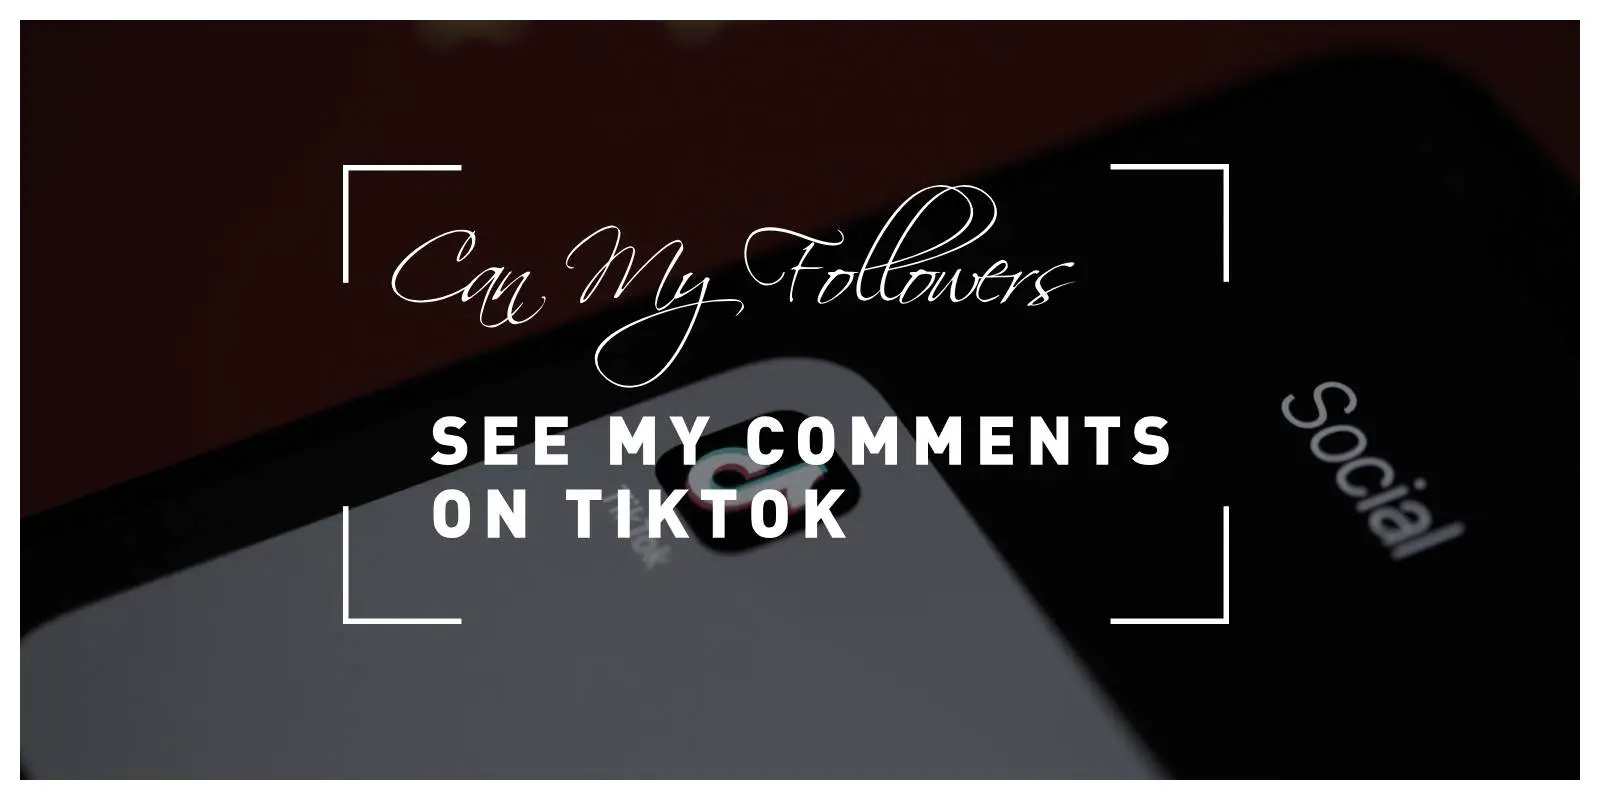  Can My Followers See My Comments On TikTok